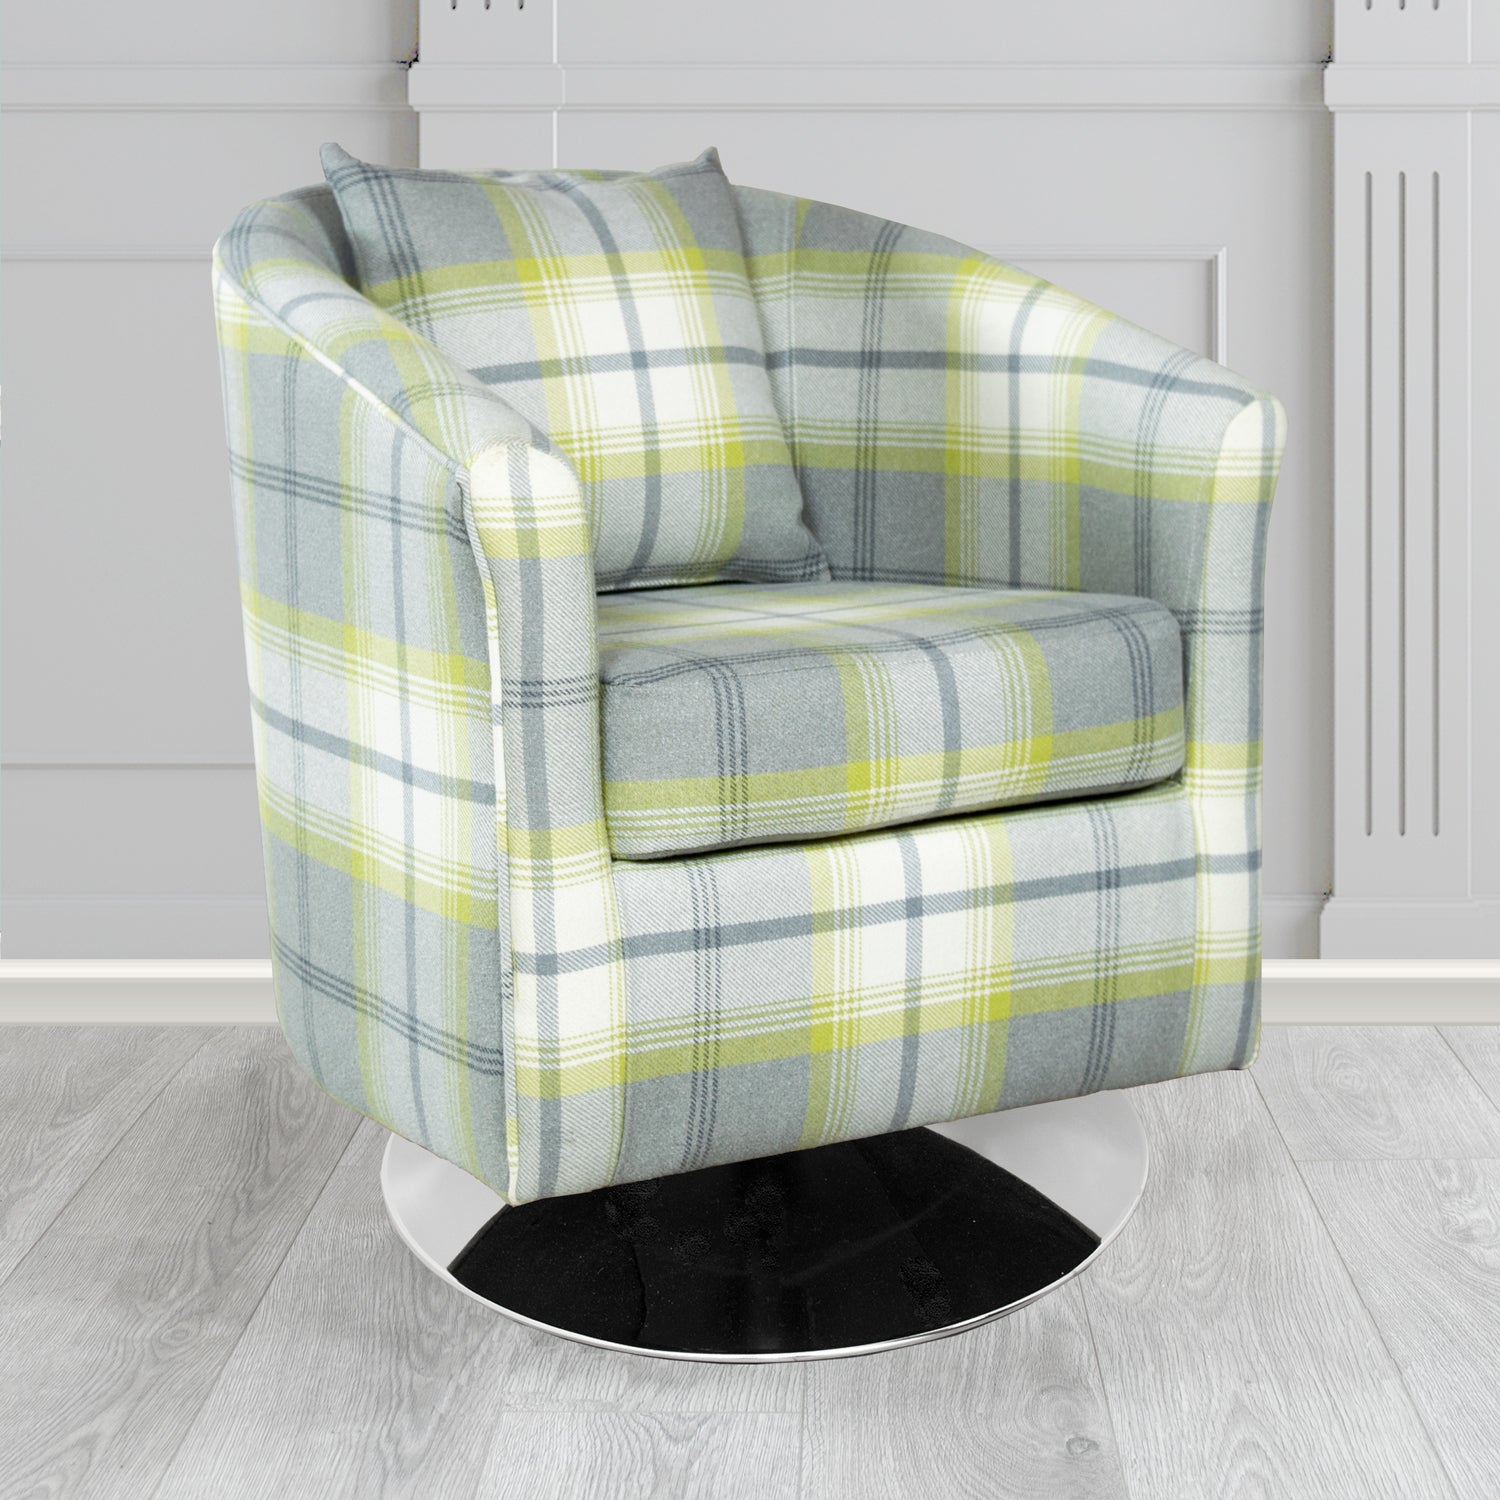 St Tropez Balmoral Citrus Check Tartan Fabric Swivel Tub Chair with Scatter Cushion (6627068084266)